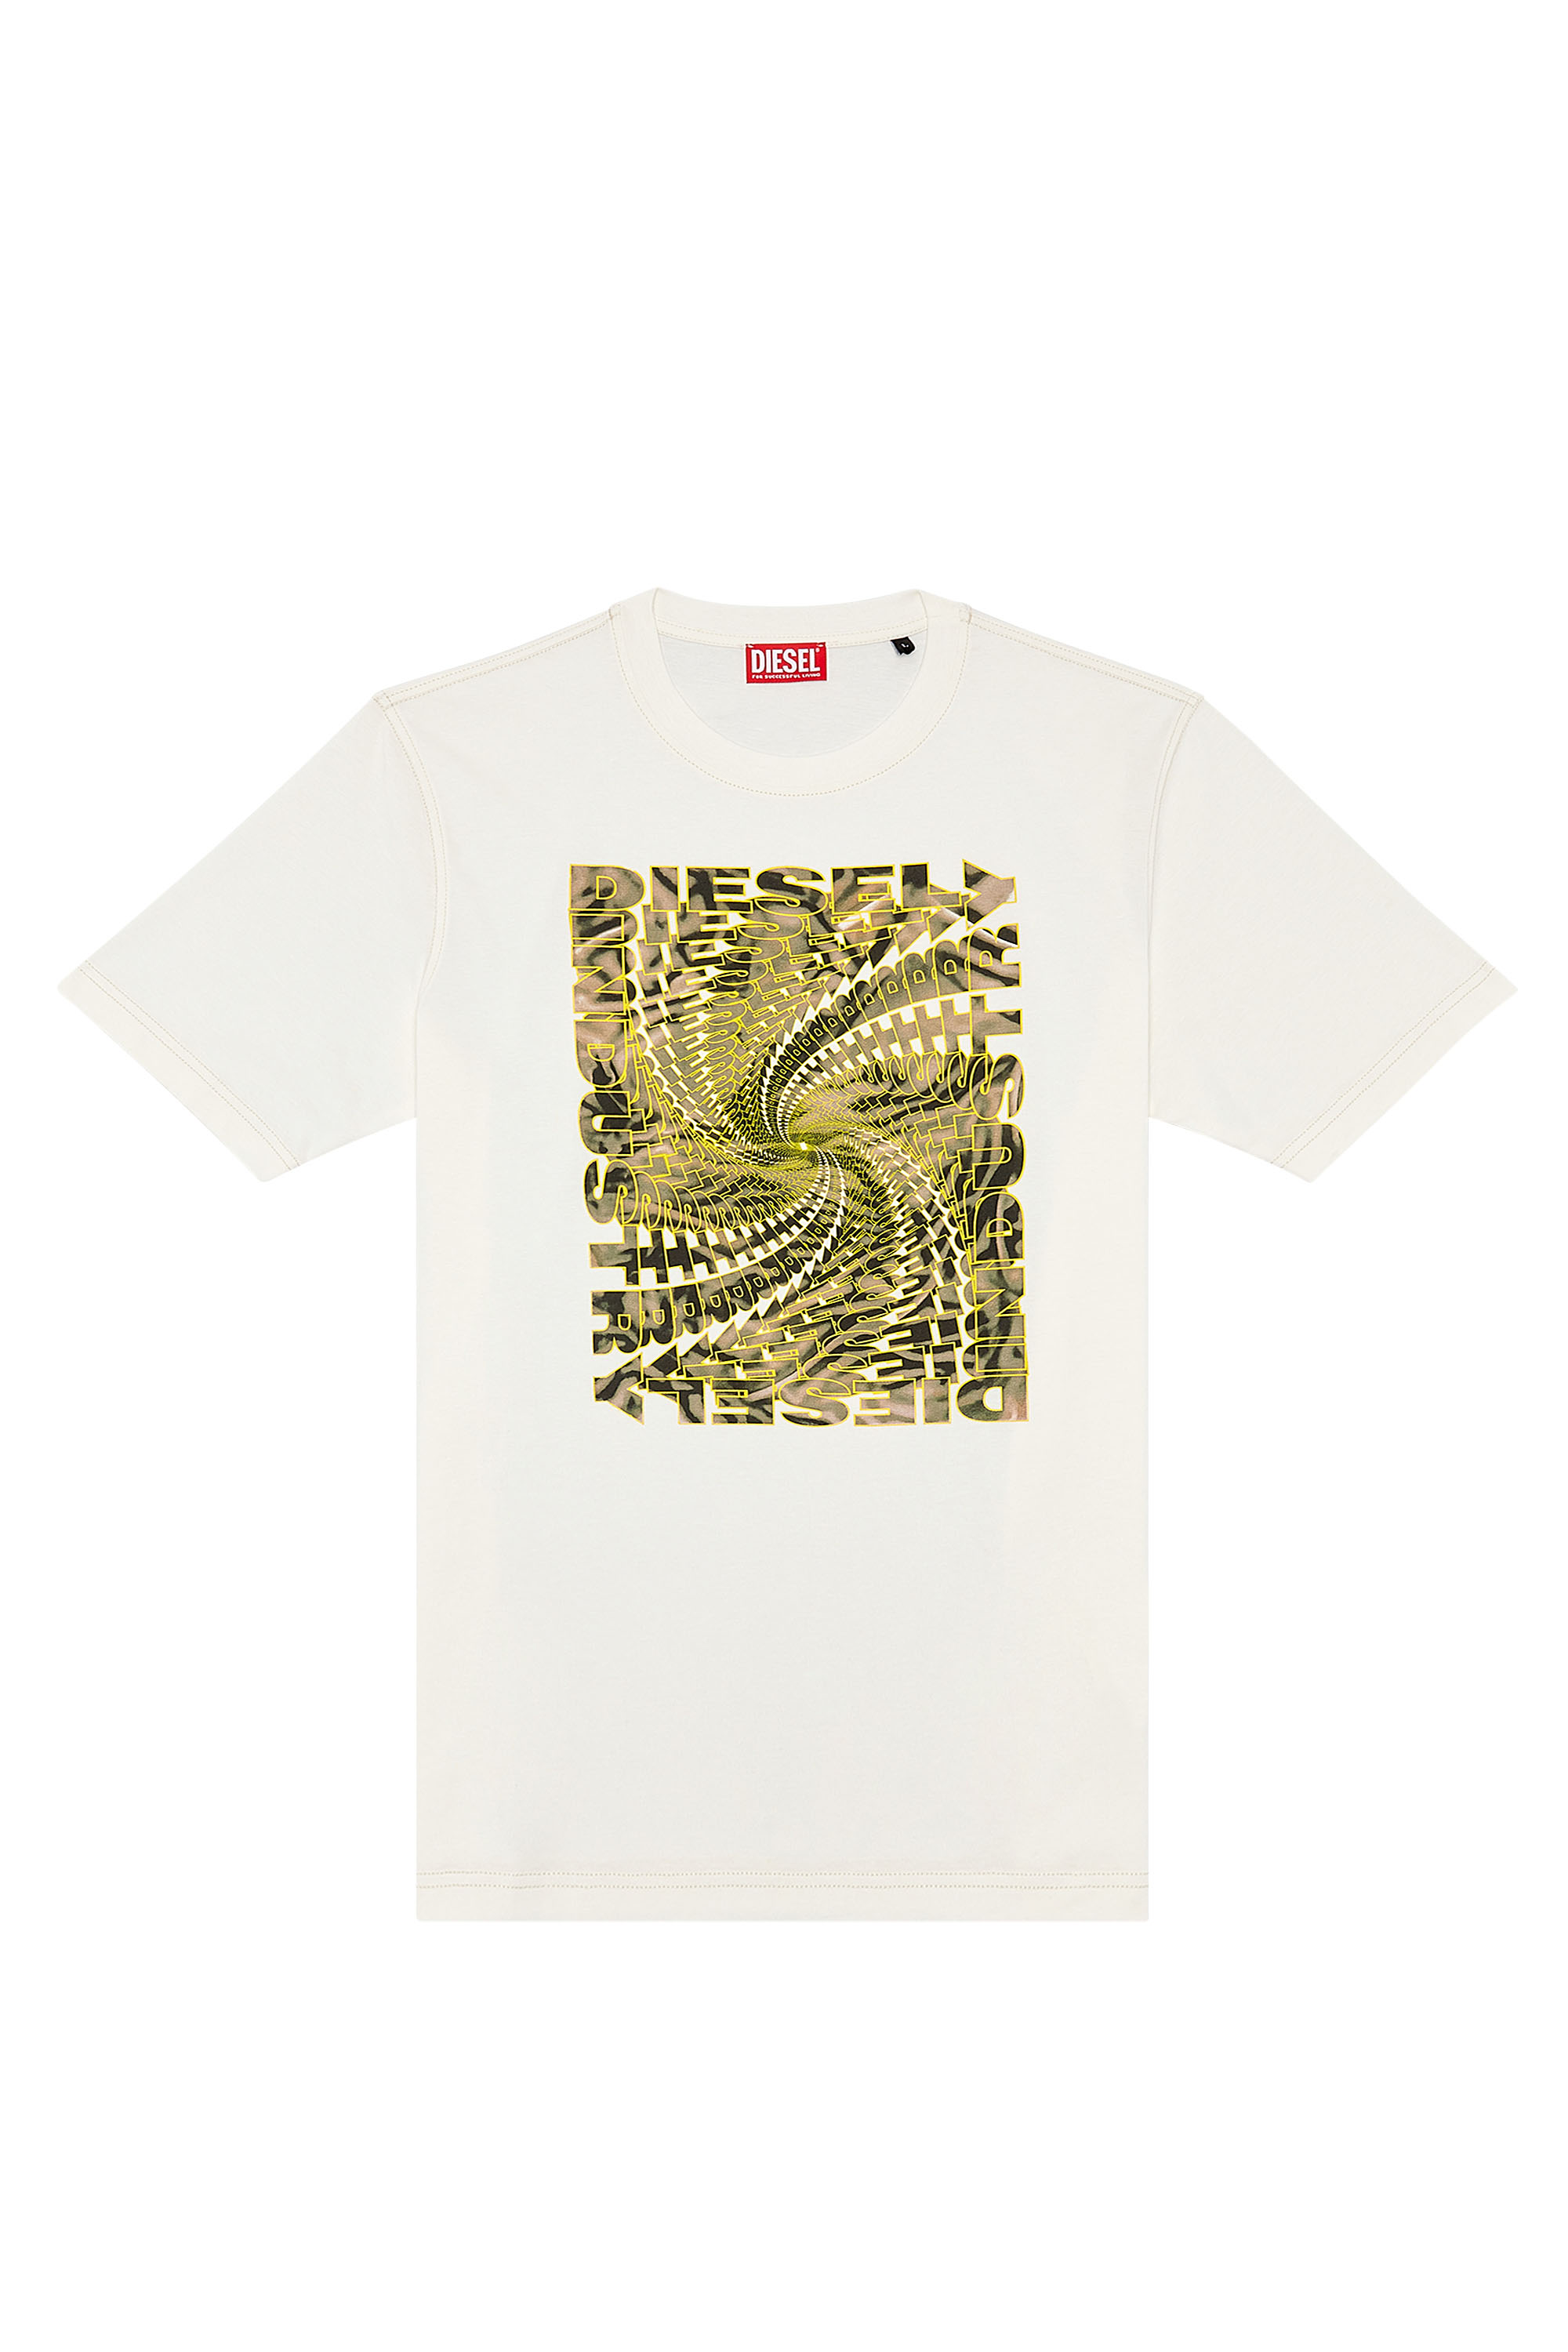 Diesel - T-JUST-N12, Man T-shirt with zebra-camo optical logo print in White - Image 4